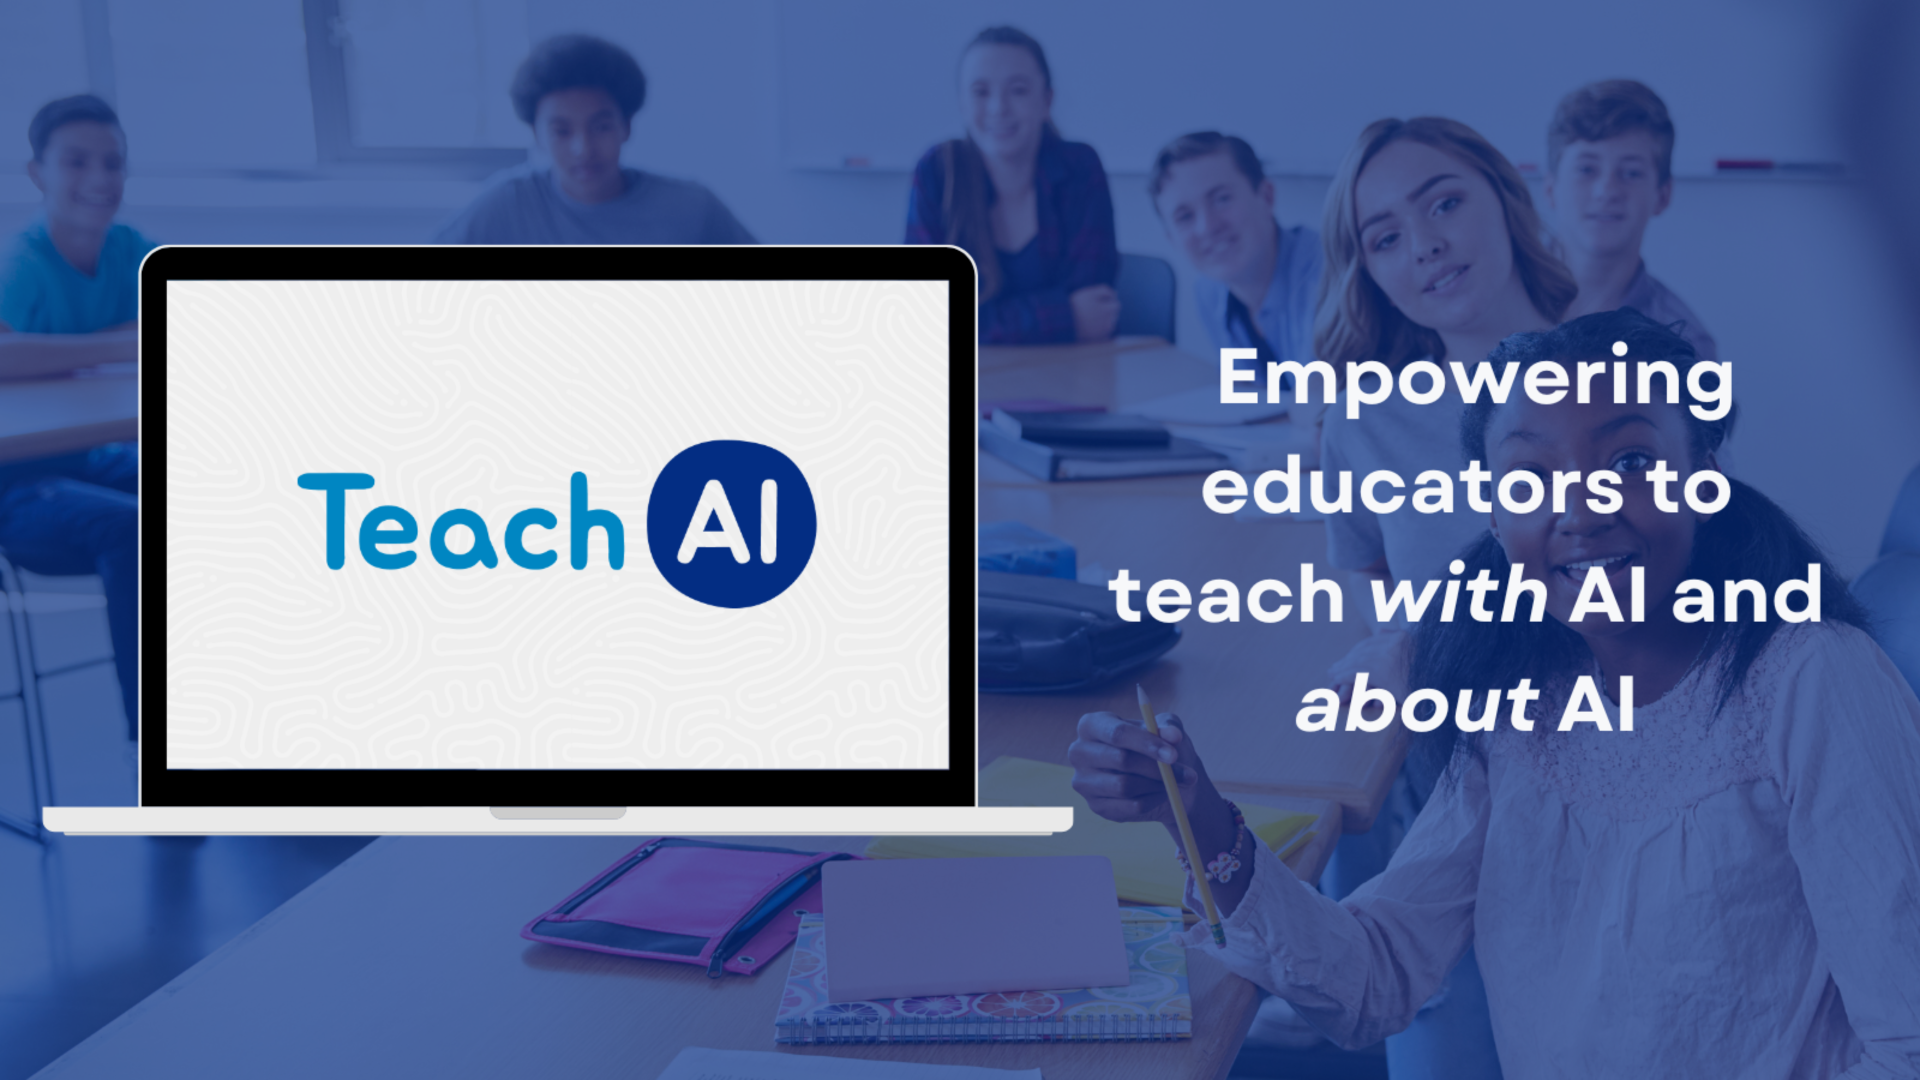 A promotional image for TeachAI